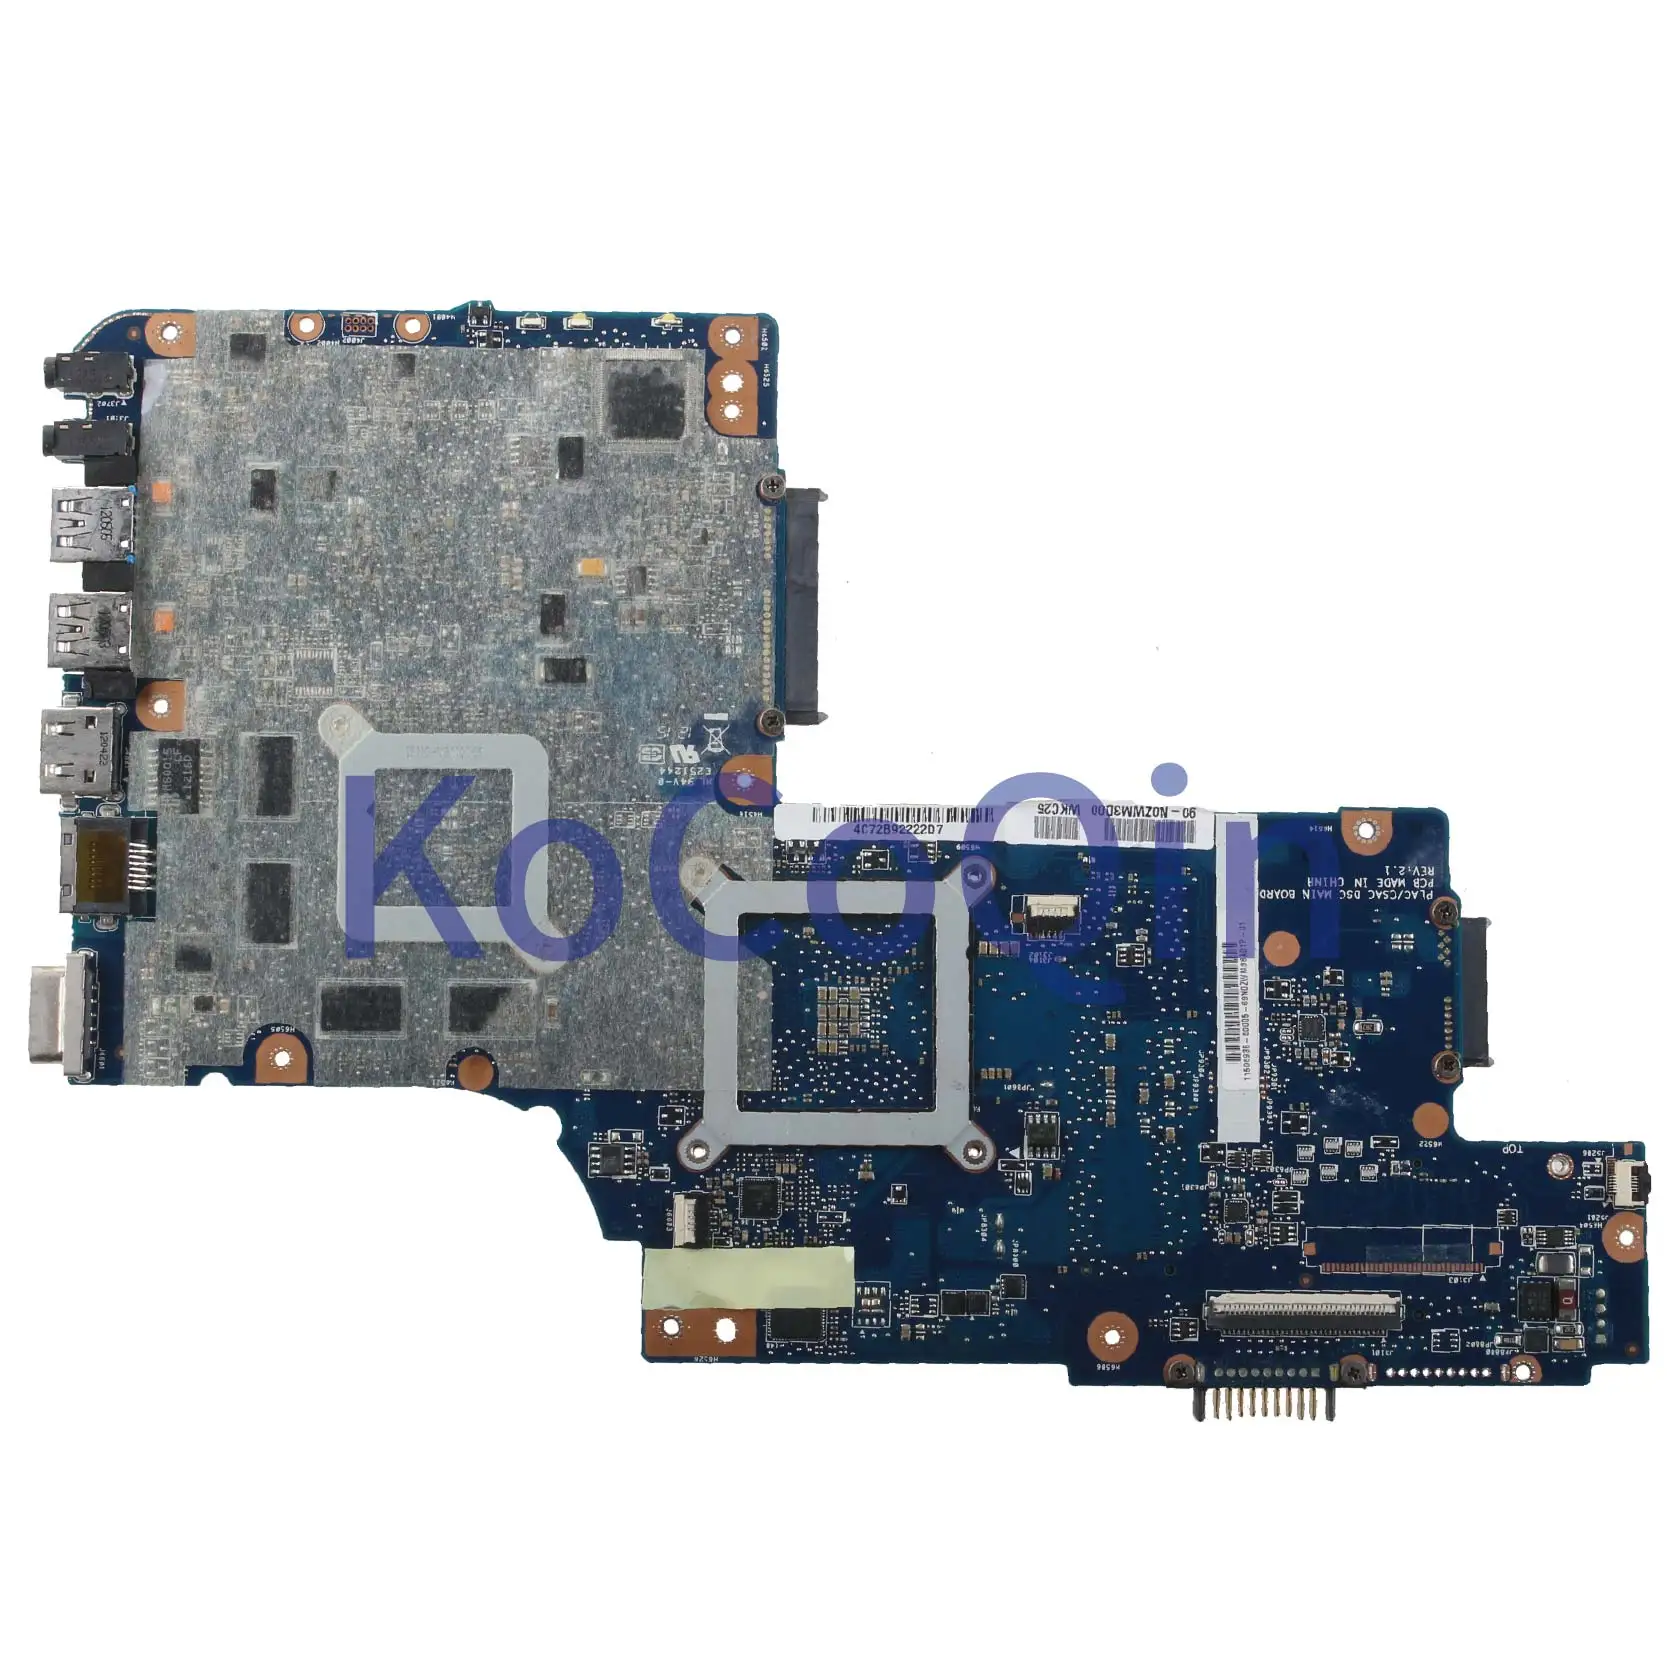 Buy  KoCoQin Laptop motherboard For TOSHIBA Satellite C850D C855D Mainboard 216-0810028